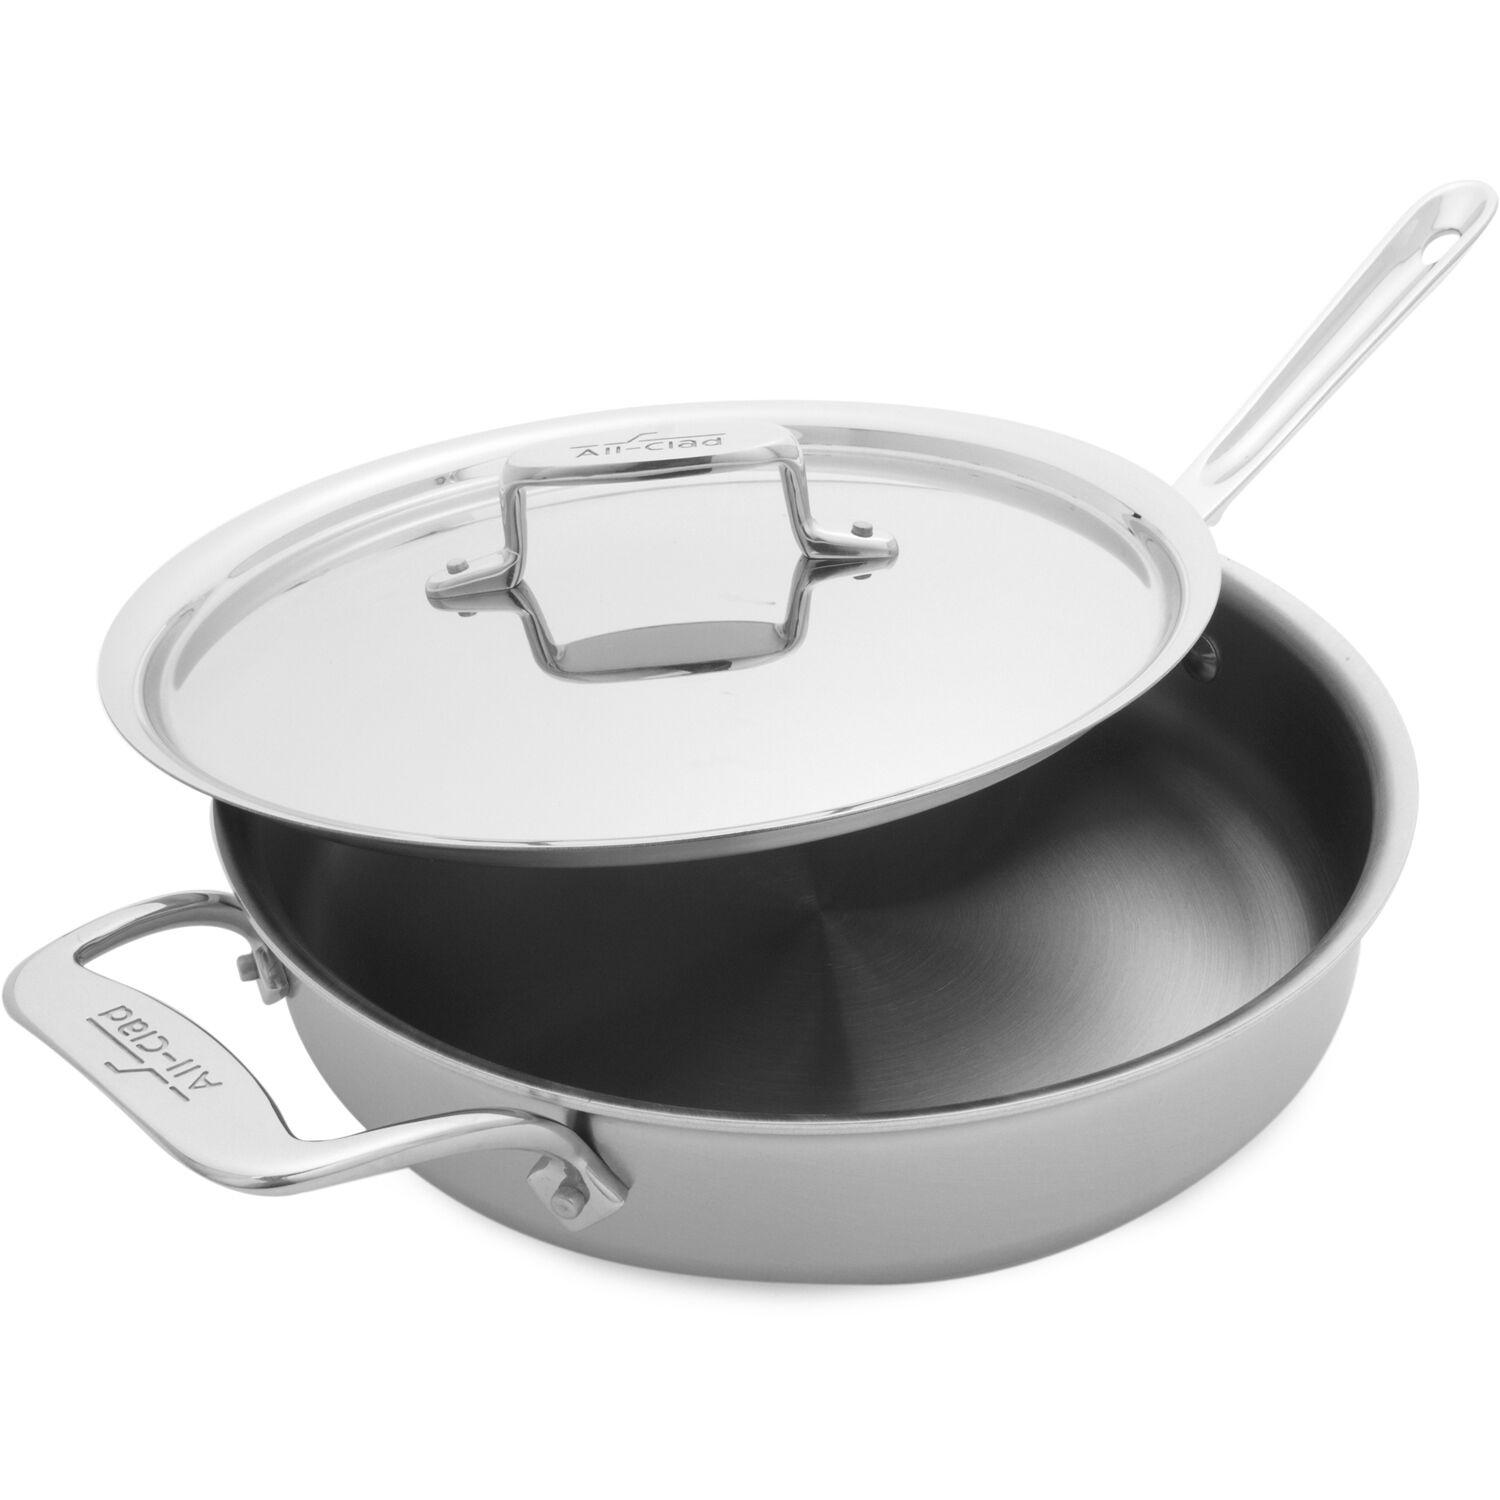 All-clad 4-quart Stainless Steel Saute Pan With Lid